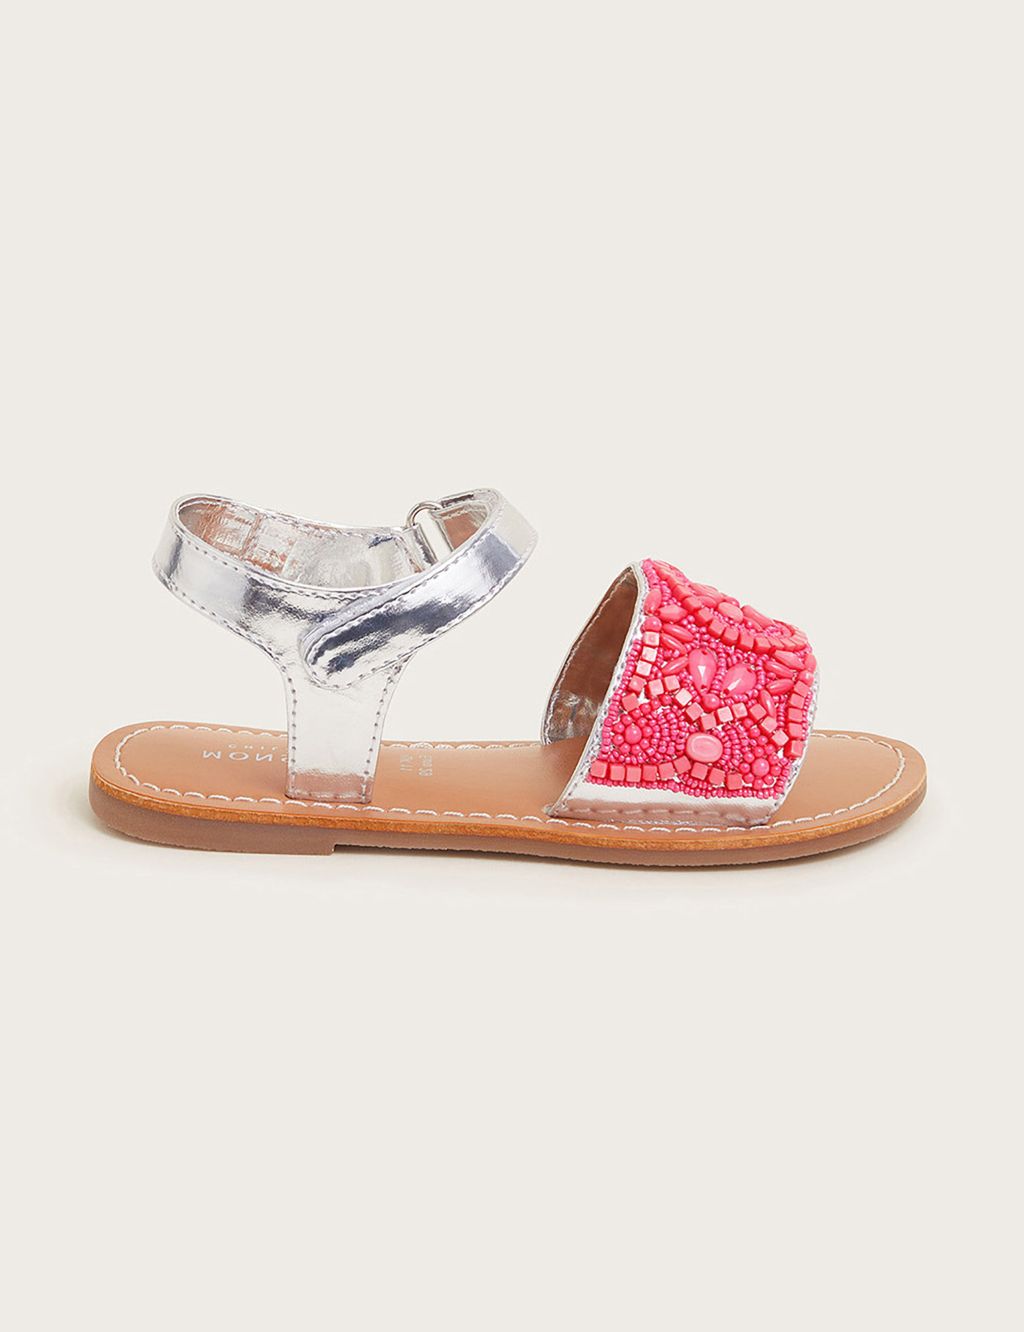 Kids' Sandals (7 Small - 4 Large)